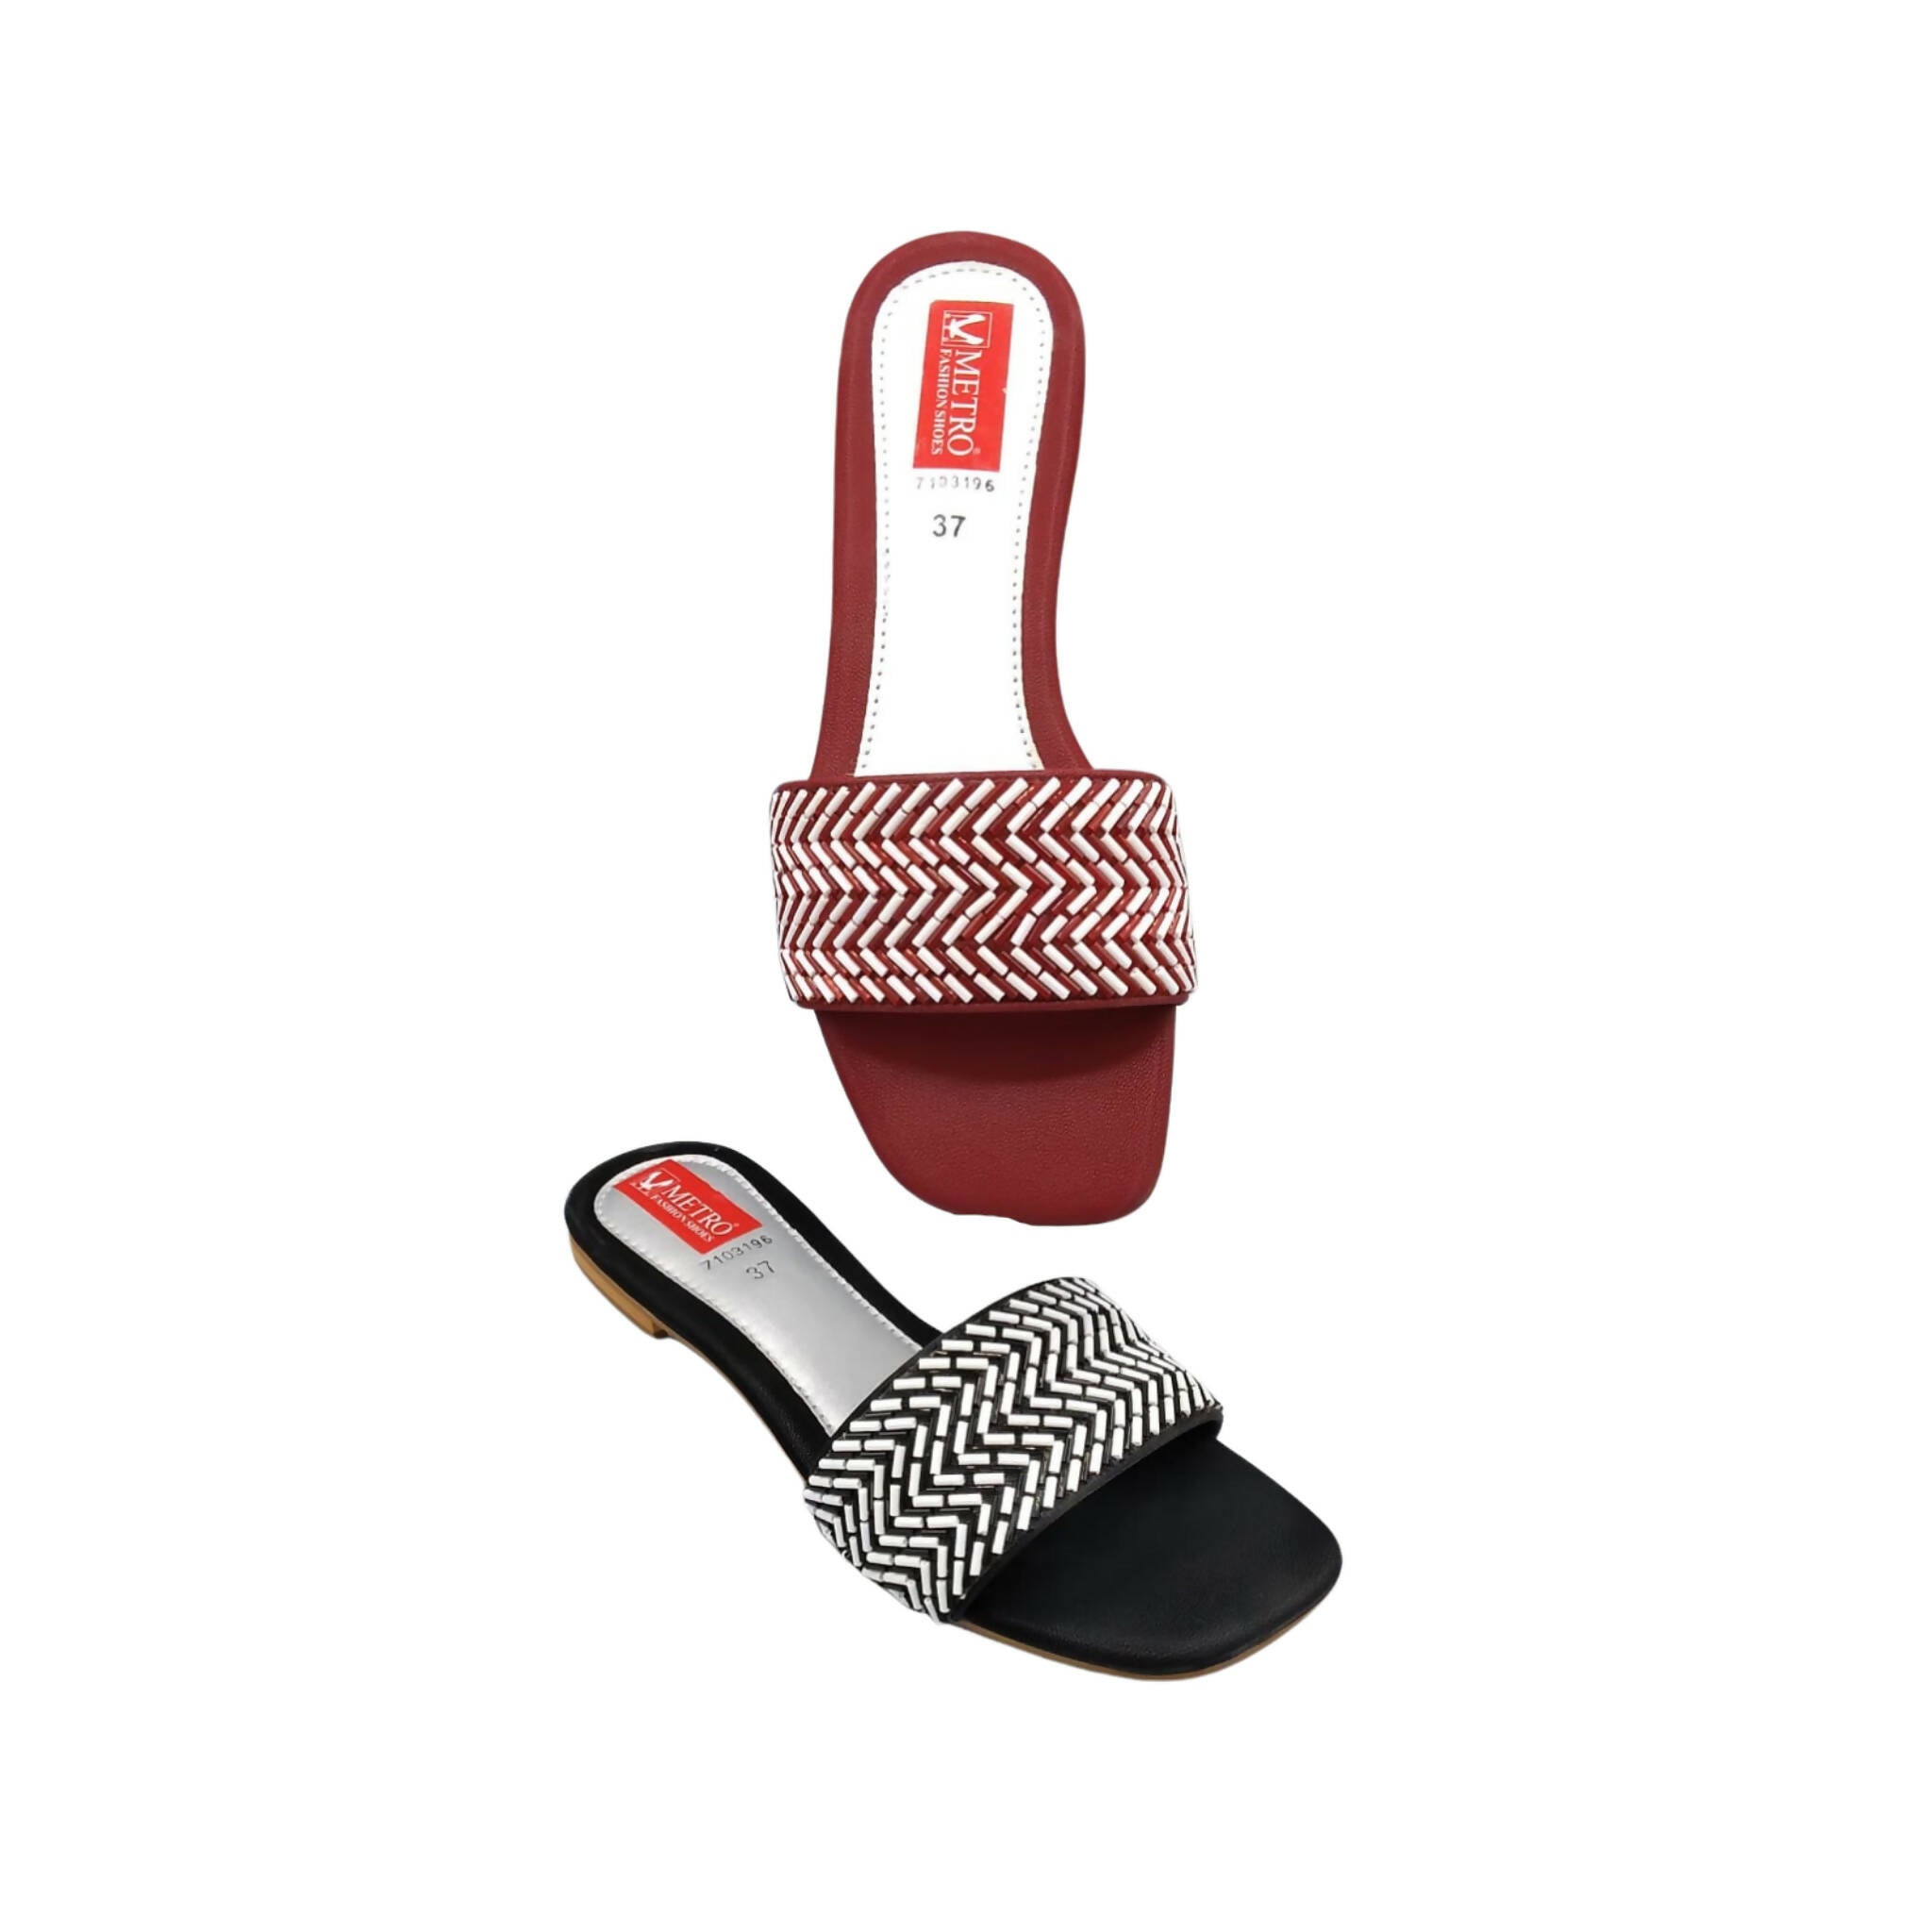 Slipper, Comfort and Style in Every Step, for Women